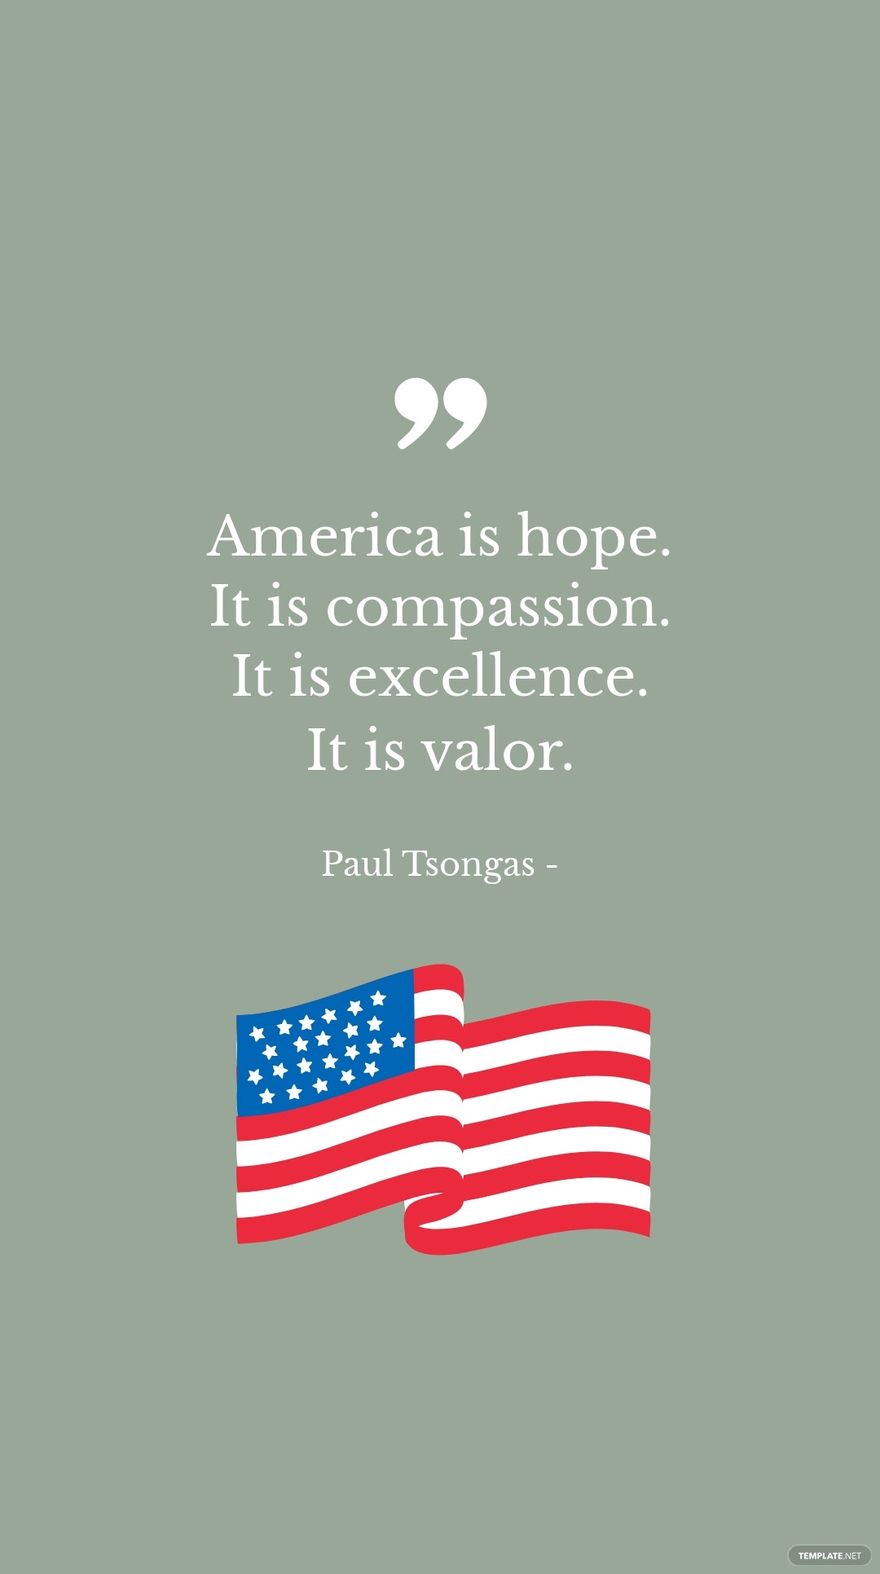 Paul Tsongas - America is hope. It is compassion. It is excellence. It is valor. in JPG